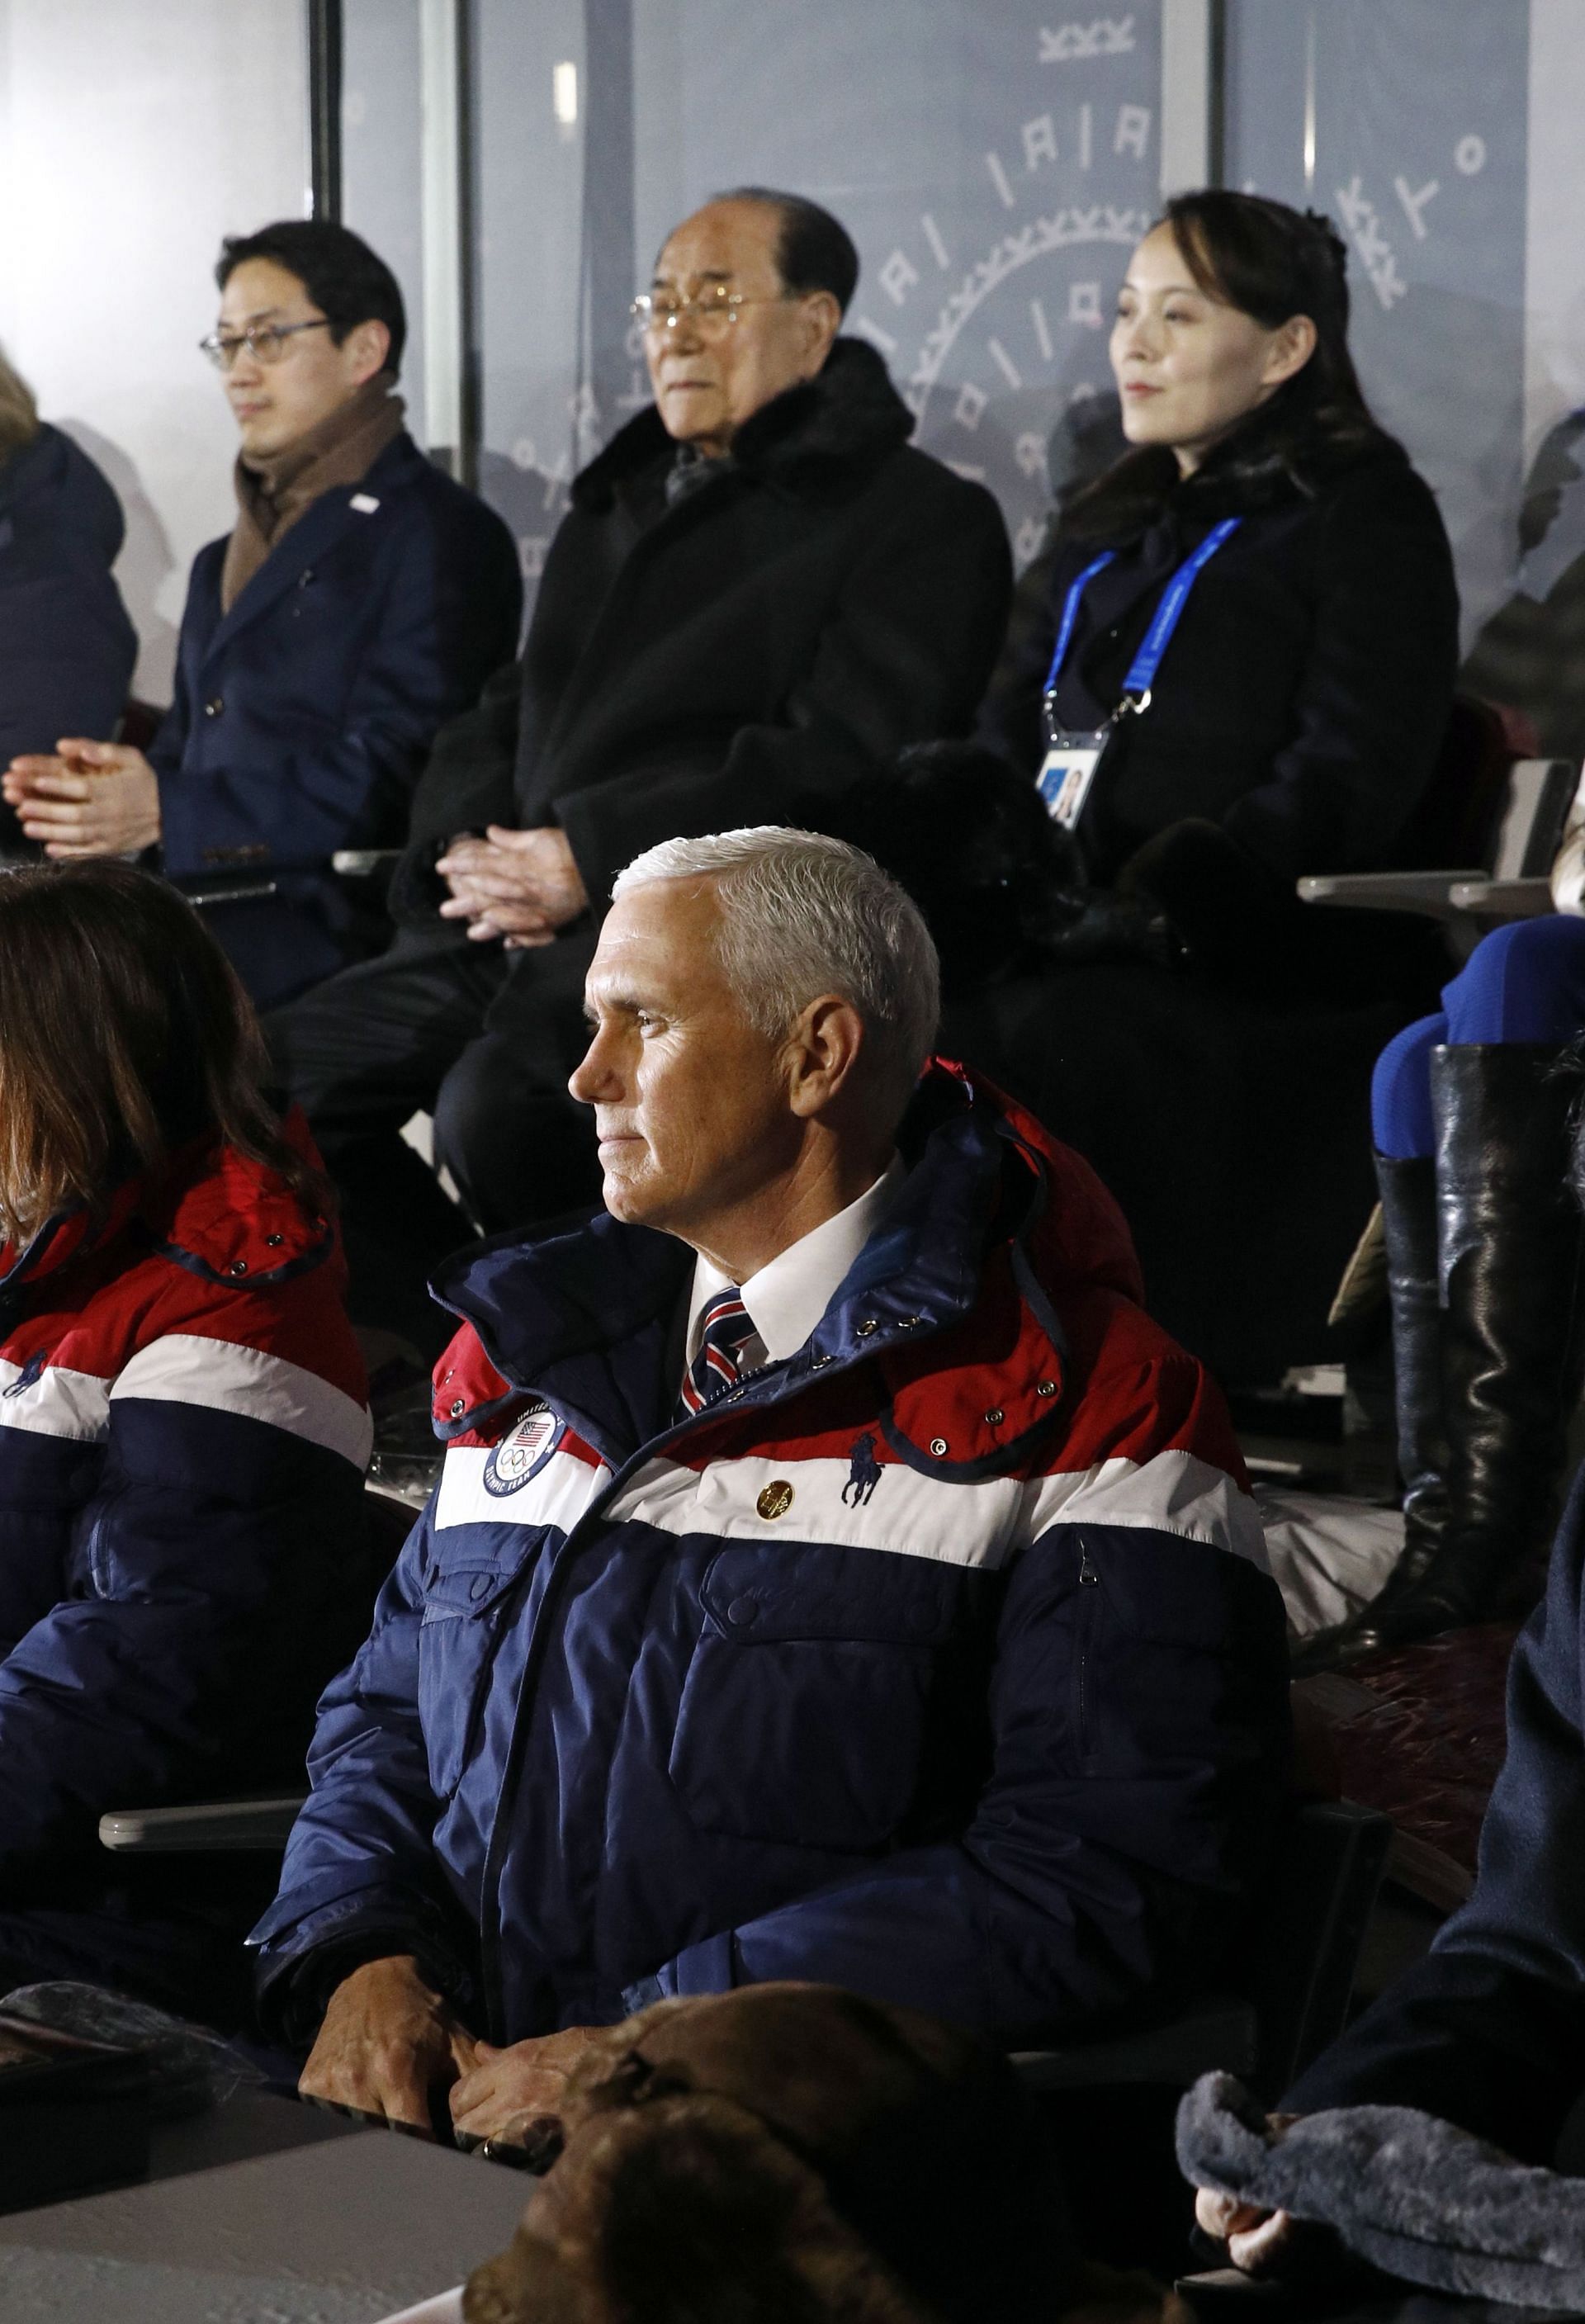 Vice President Mike Pence, bottom, watches the opening ceremony with Kim Yo Jong, top right, sister of North Korean leader Kim Jong U, atf the PyeongChang 2018 Winter Olympic Games at PyeongChang Olympic Stadium on February 9, 2018 in Pyeongchang-gun, South Korea. (Photo by Patrick Semansky - Pool /Getty Images)